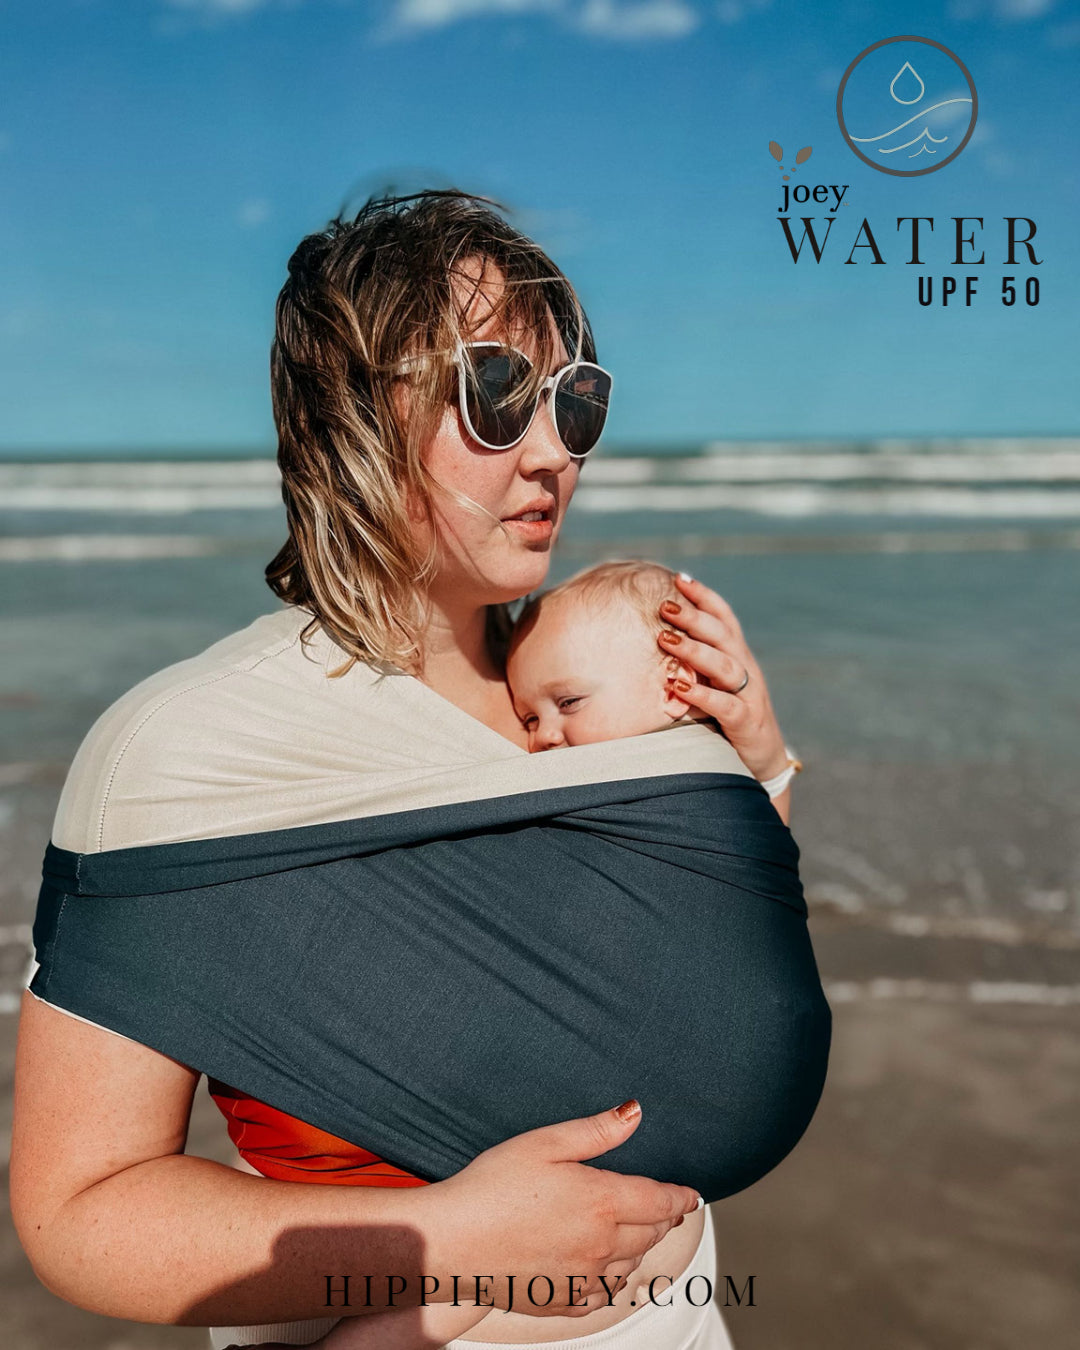 Joey Water ( A waterproof stretchy Sling/ Wrap/ baby carrier type assistant garment)  being used on the beach to keep baby happy